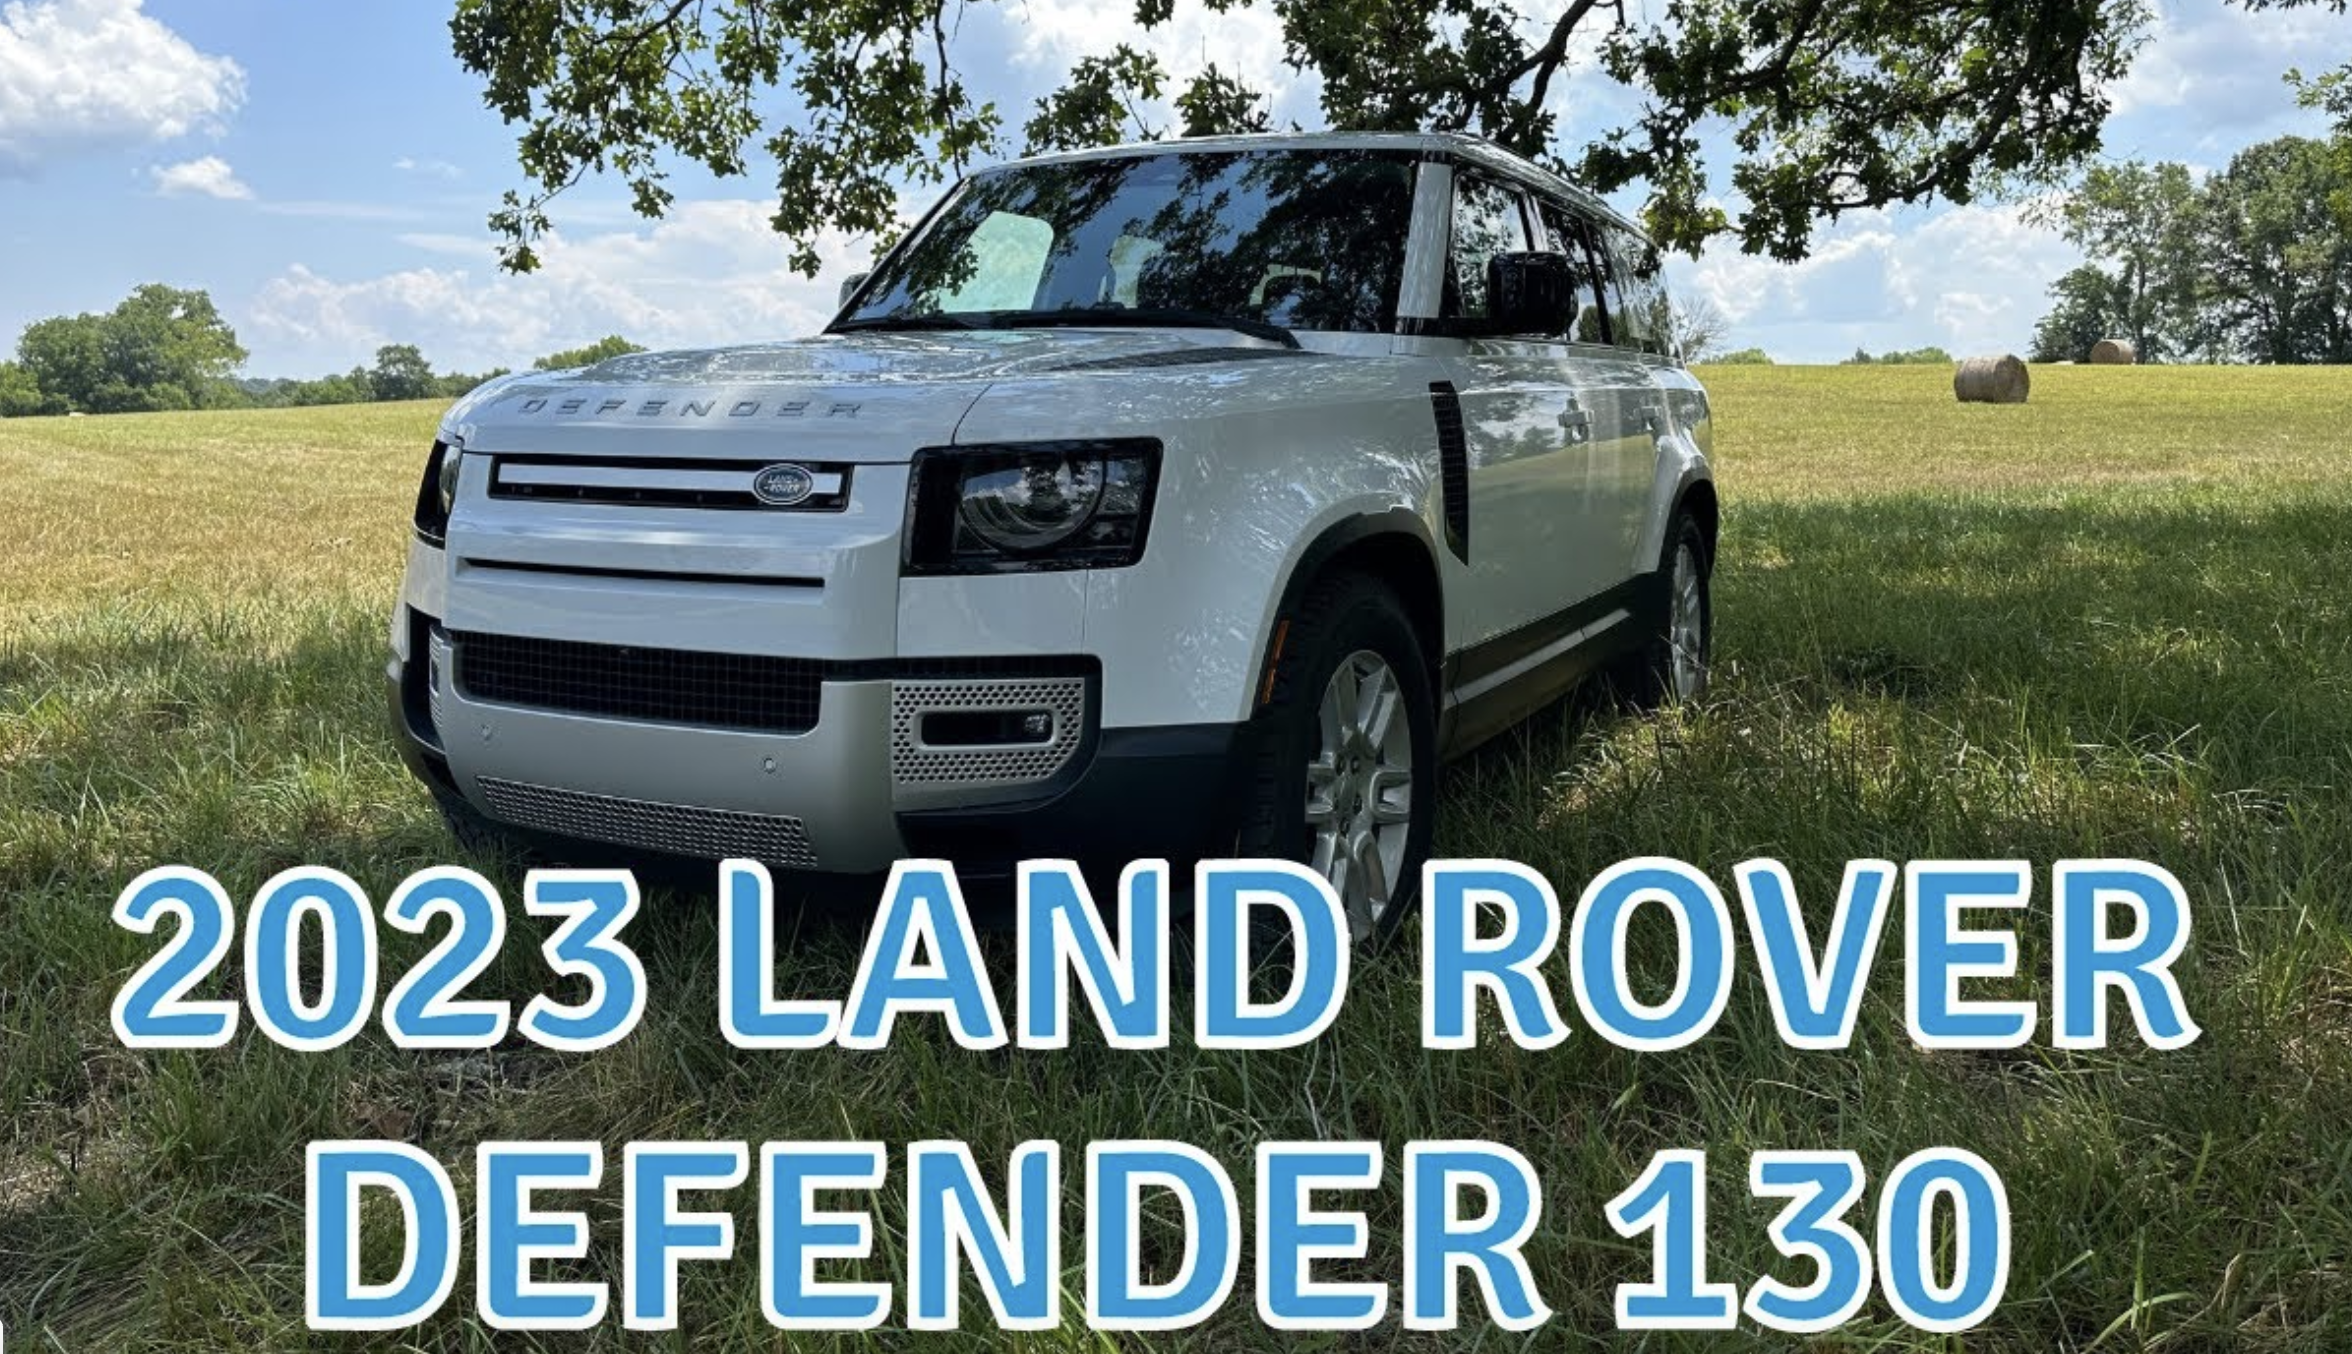 REVIEW: 2023 Land Rover Defender 130